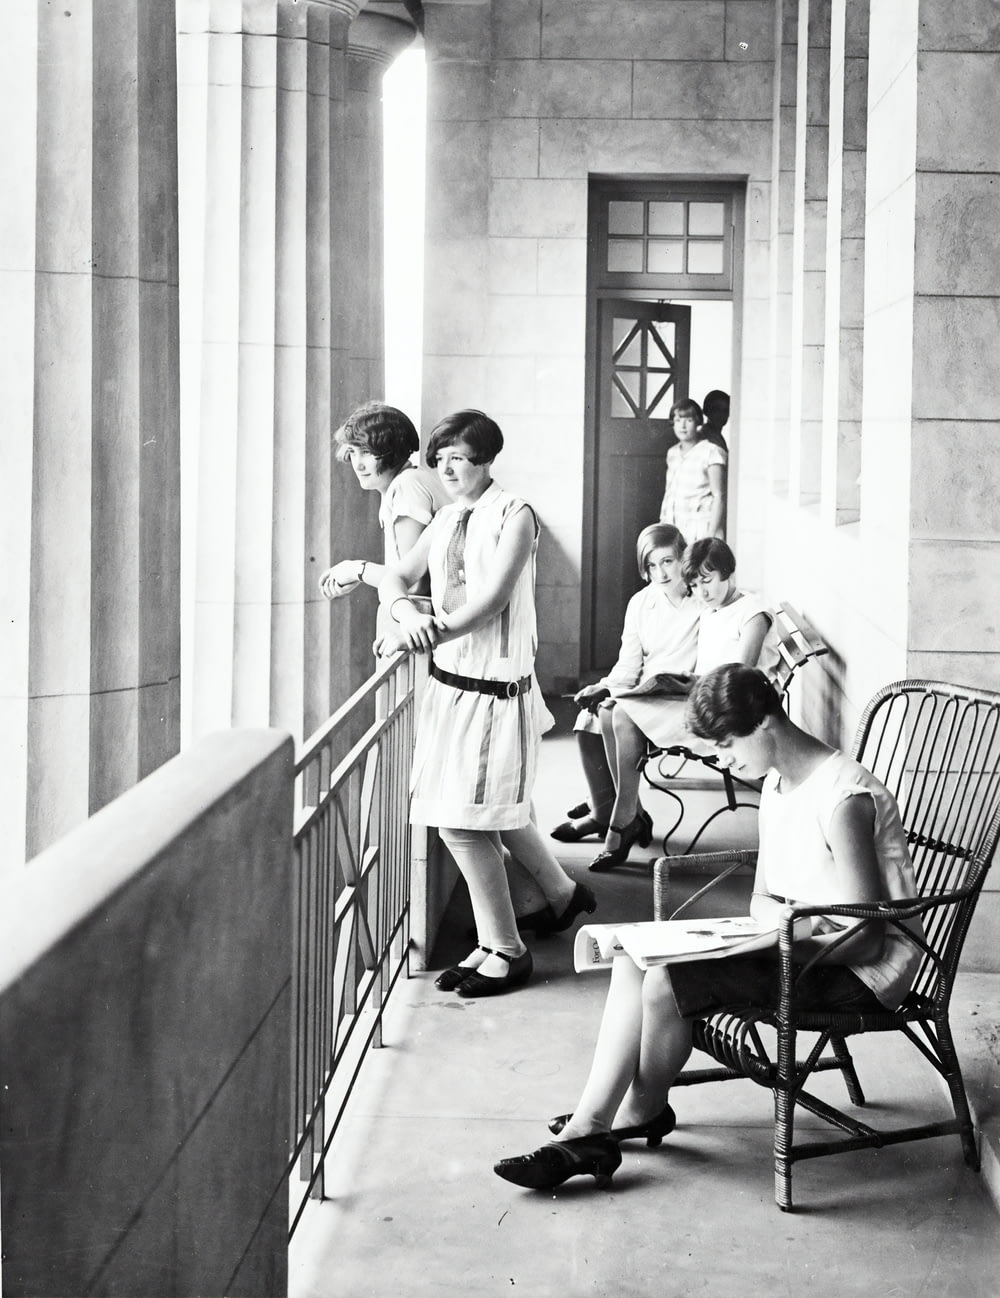 group of woman sitting and standing beside railing